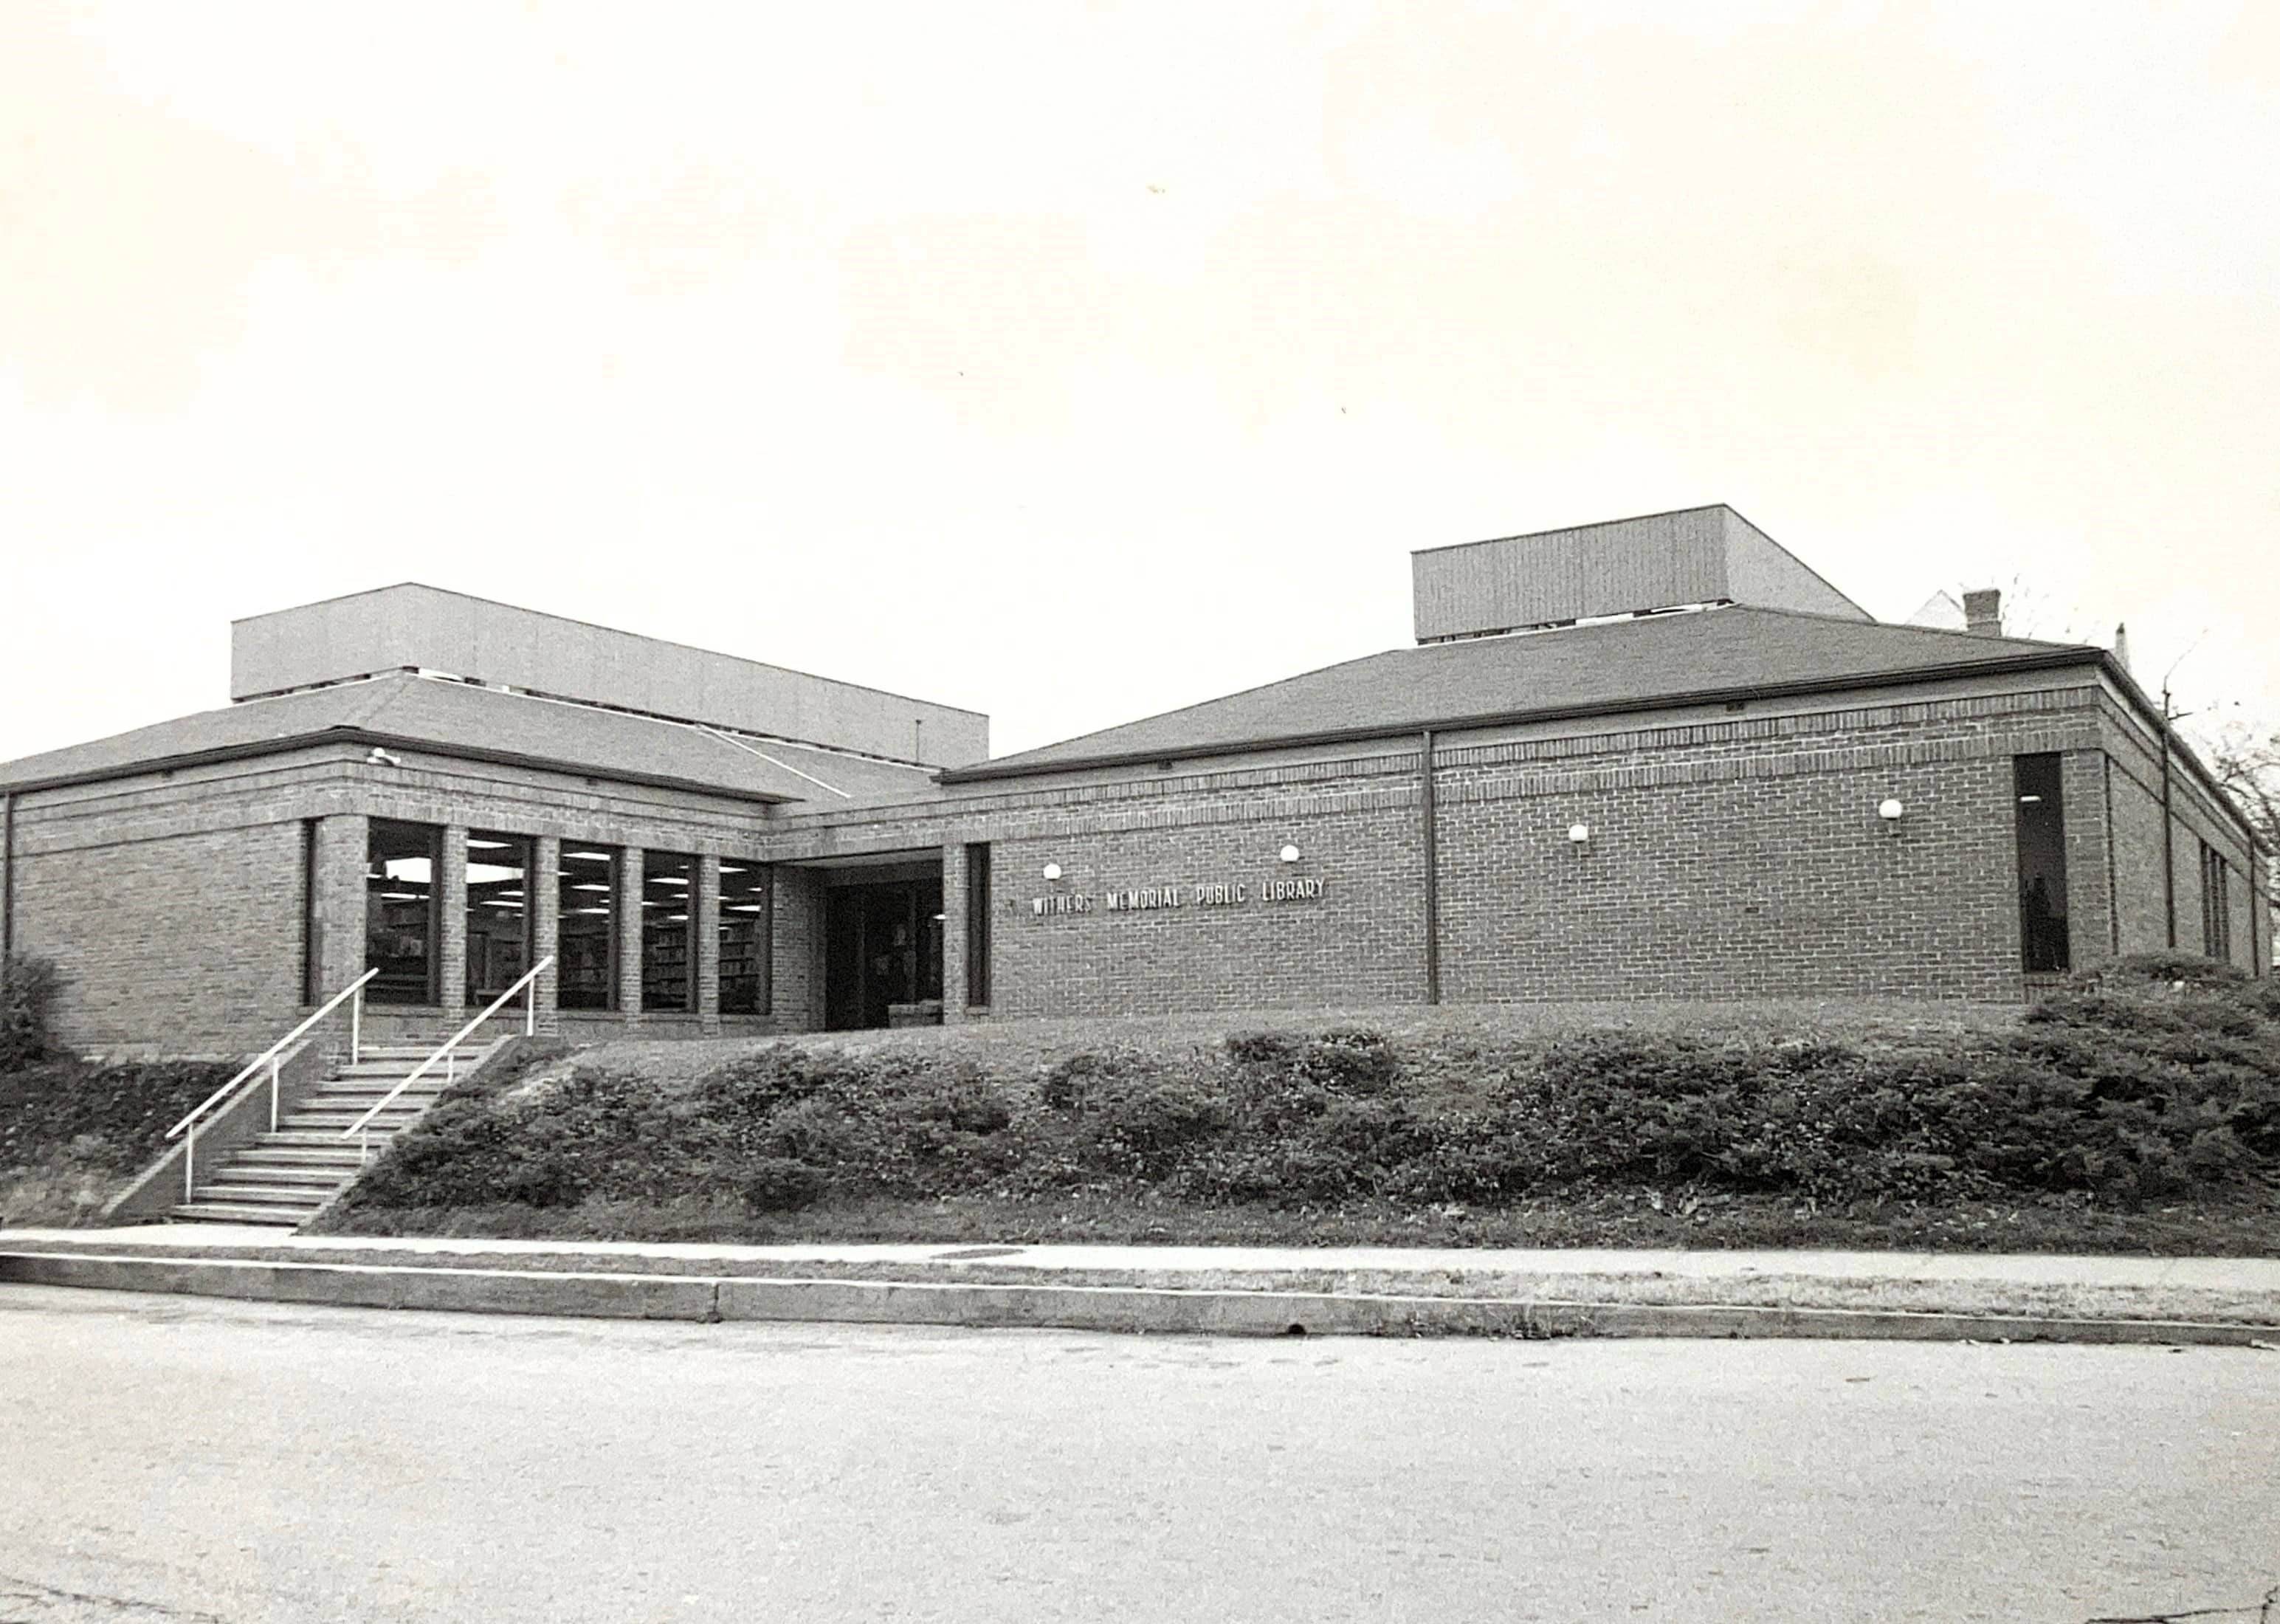 Exterior of Withers Memorial Public Library, circa 1975.